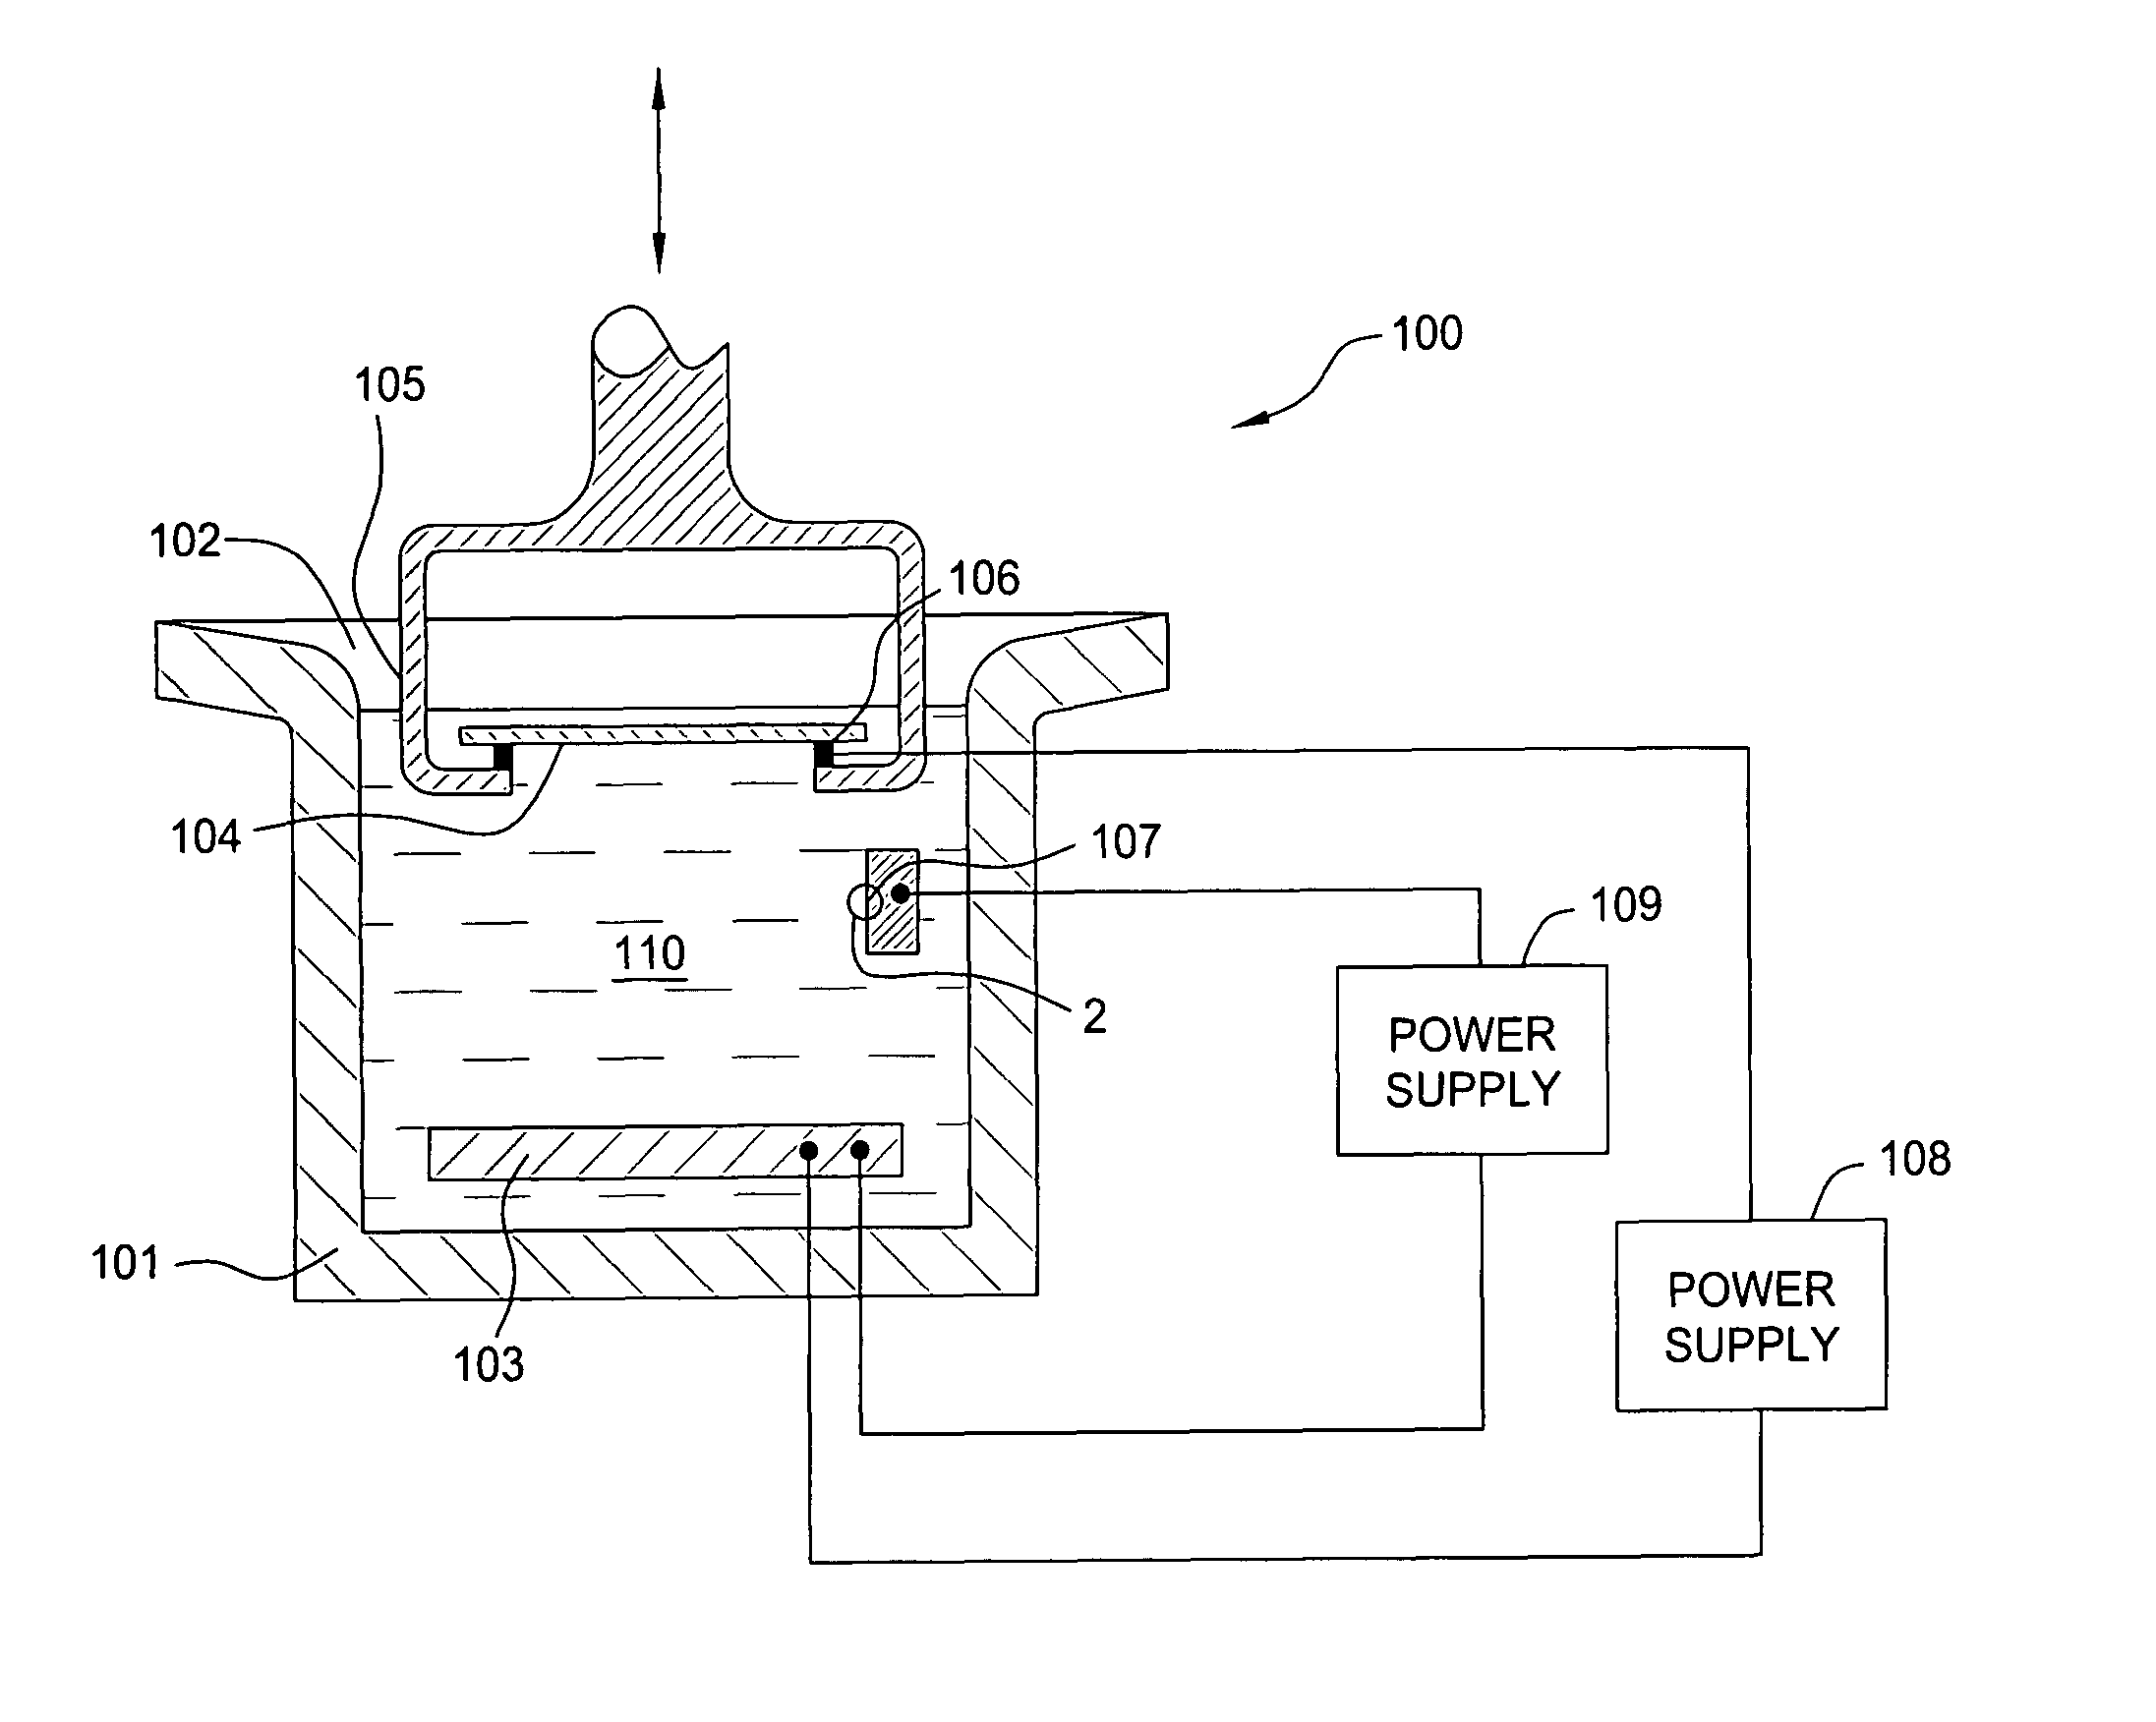 Electrolytic capacitor for electric field modulation